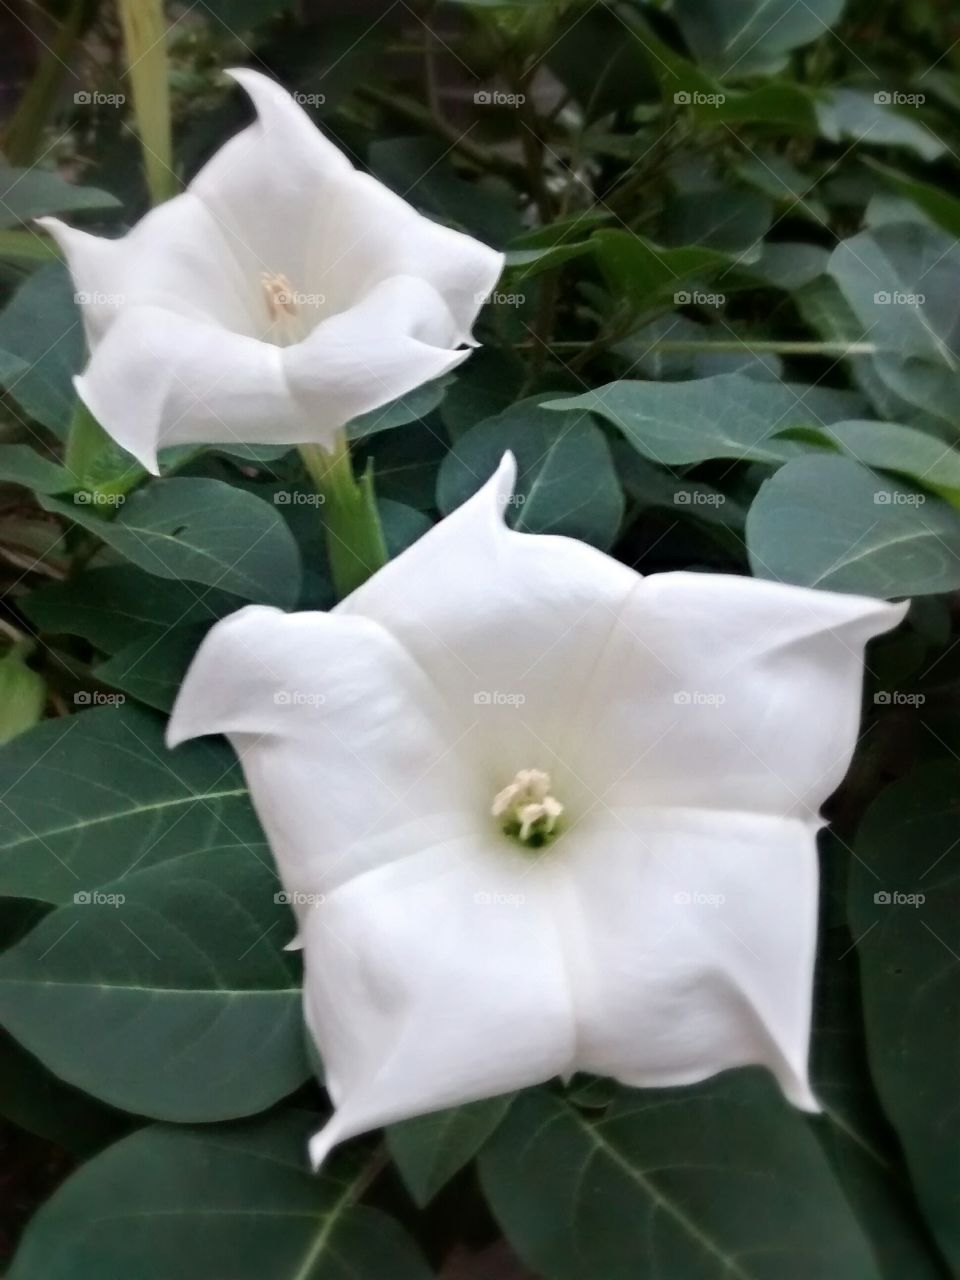 moon flower blooms for dusk to dawn